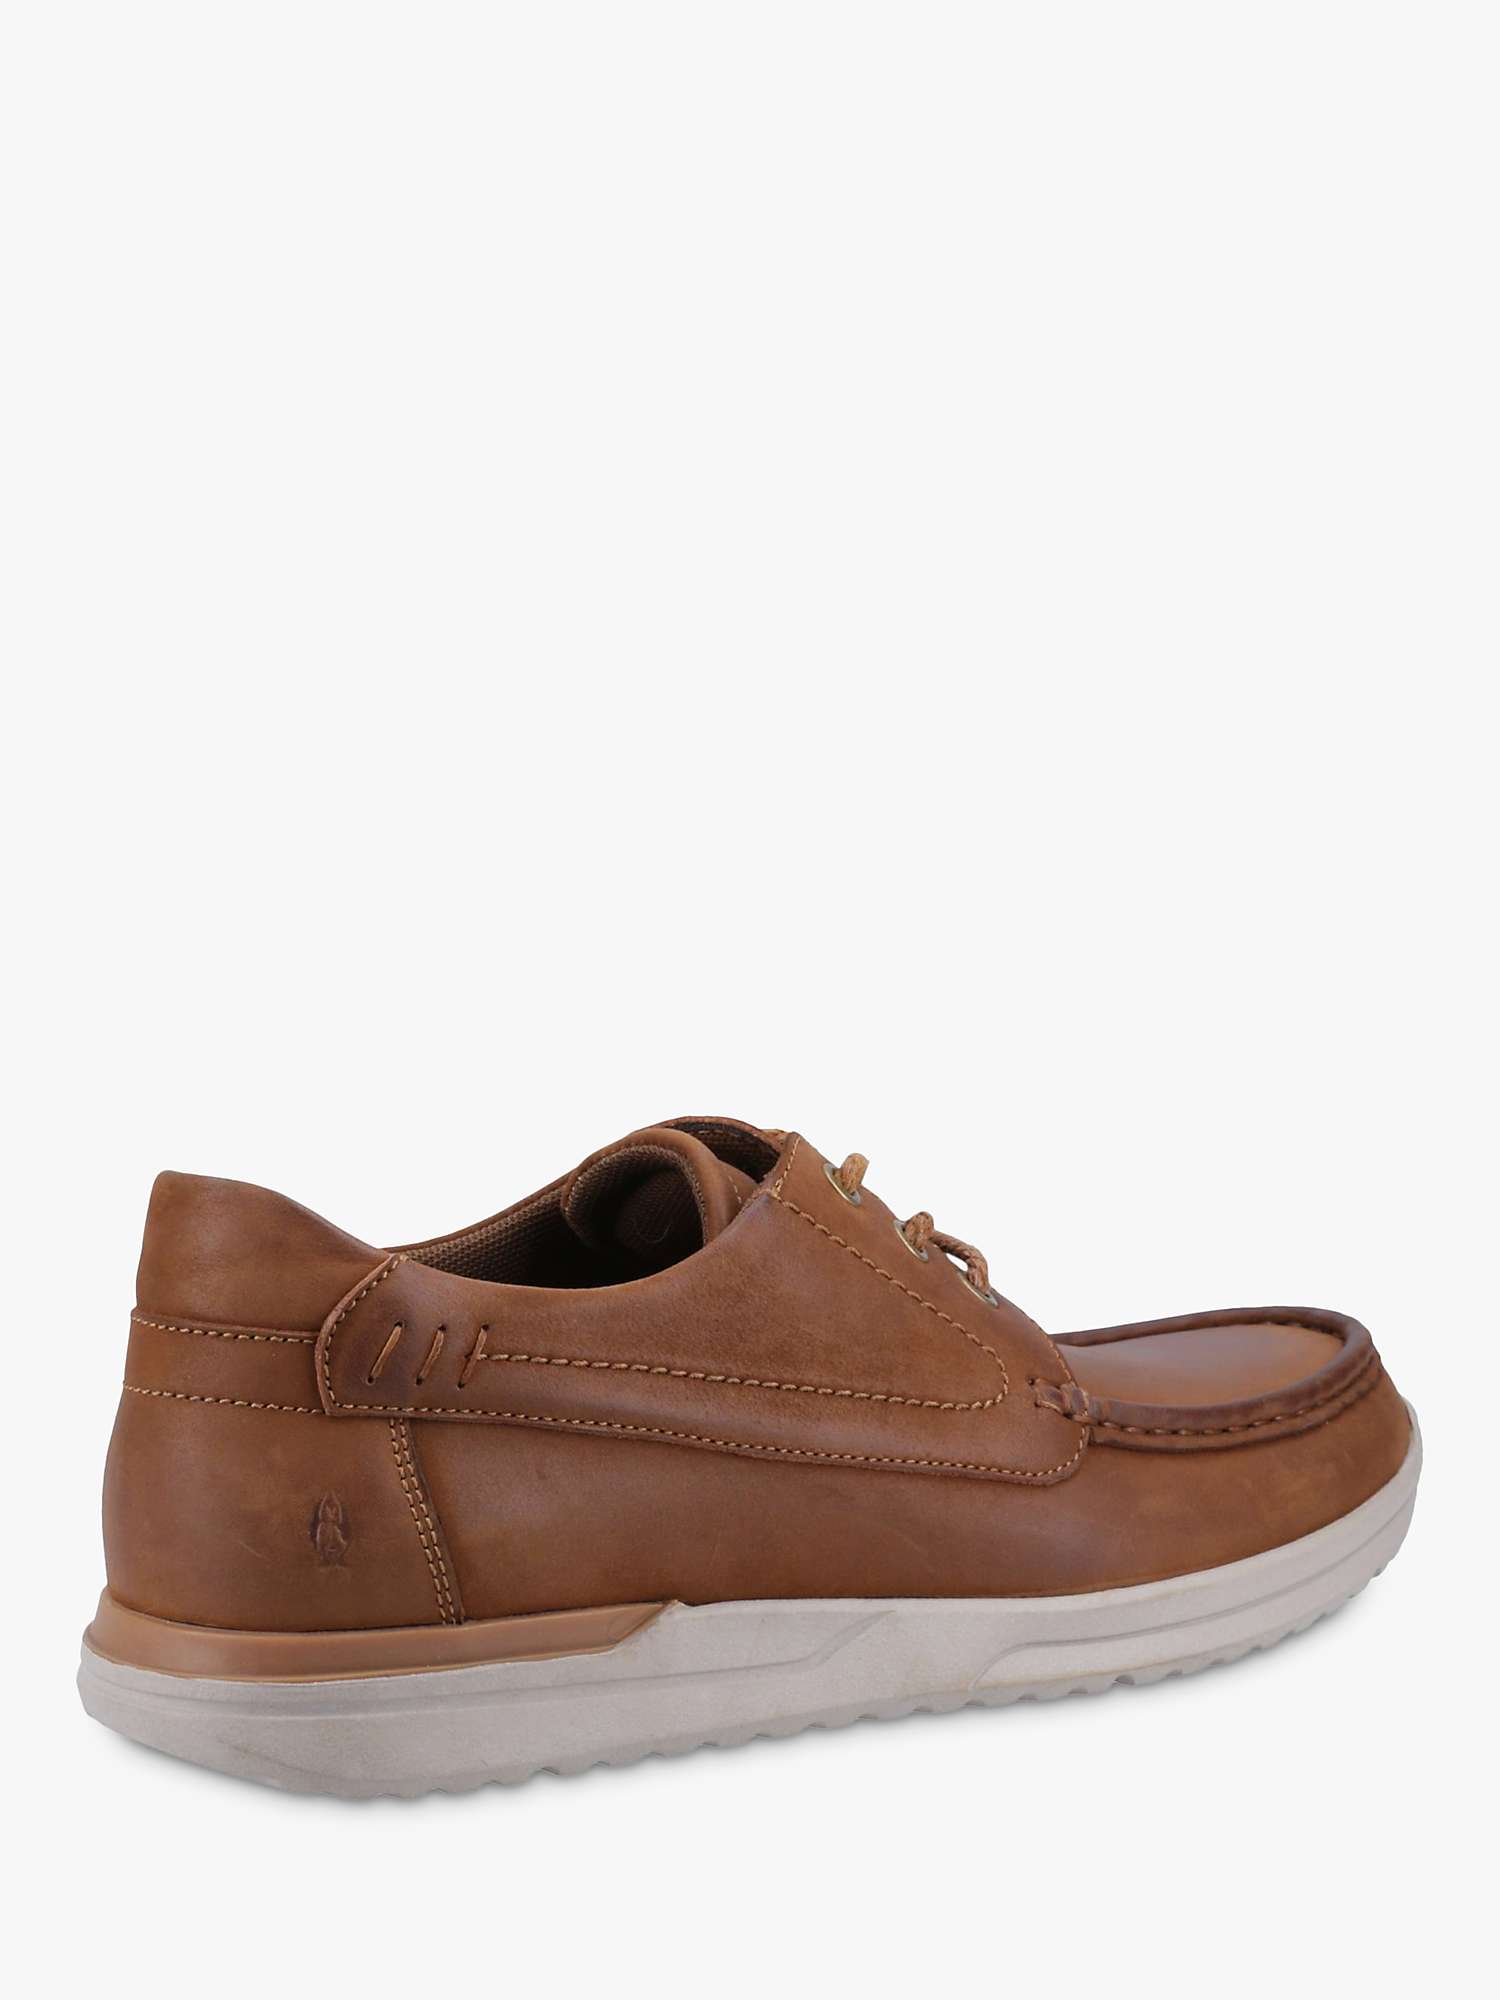 Buy Hush Puppies Howard Leather Lace Up Shoes, Tan Online at johnlewis.com